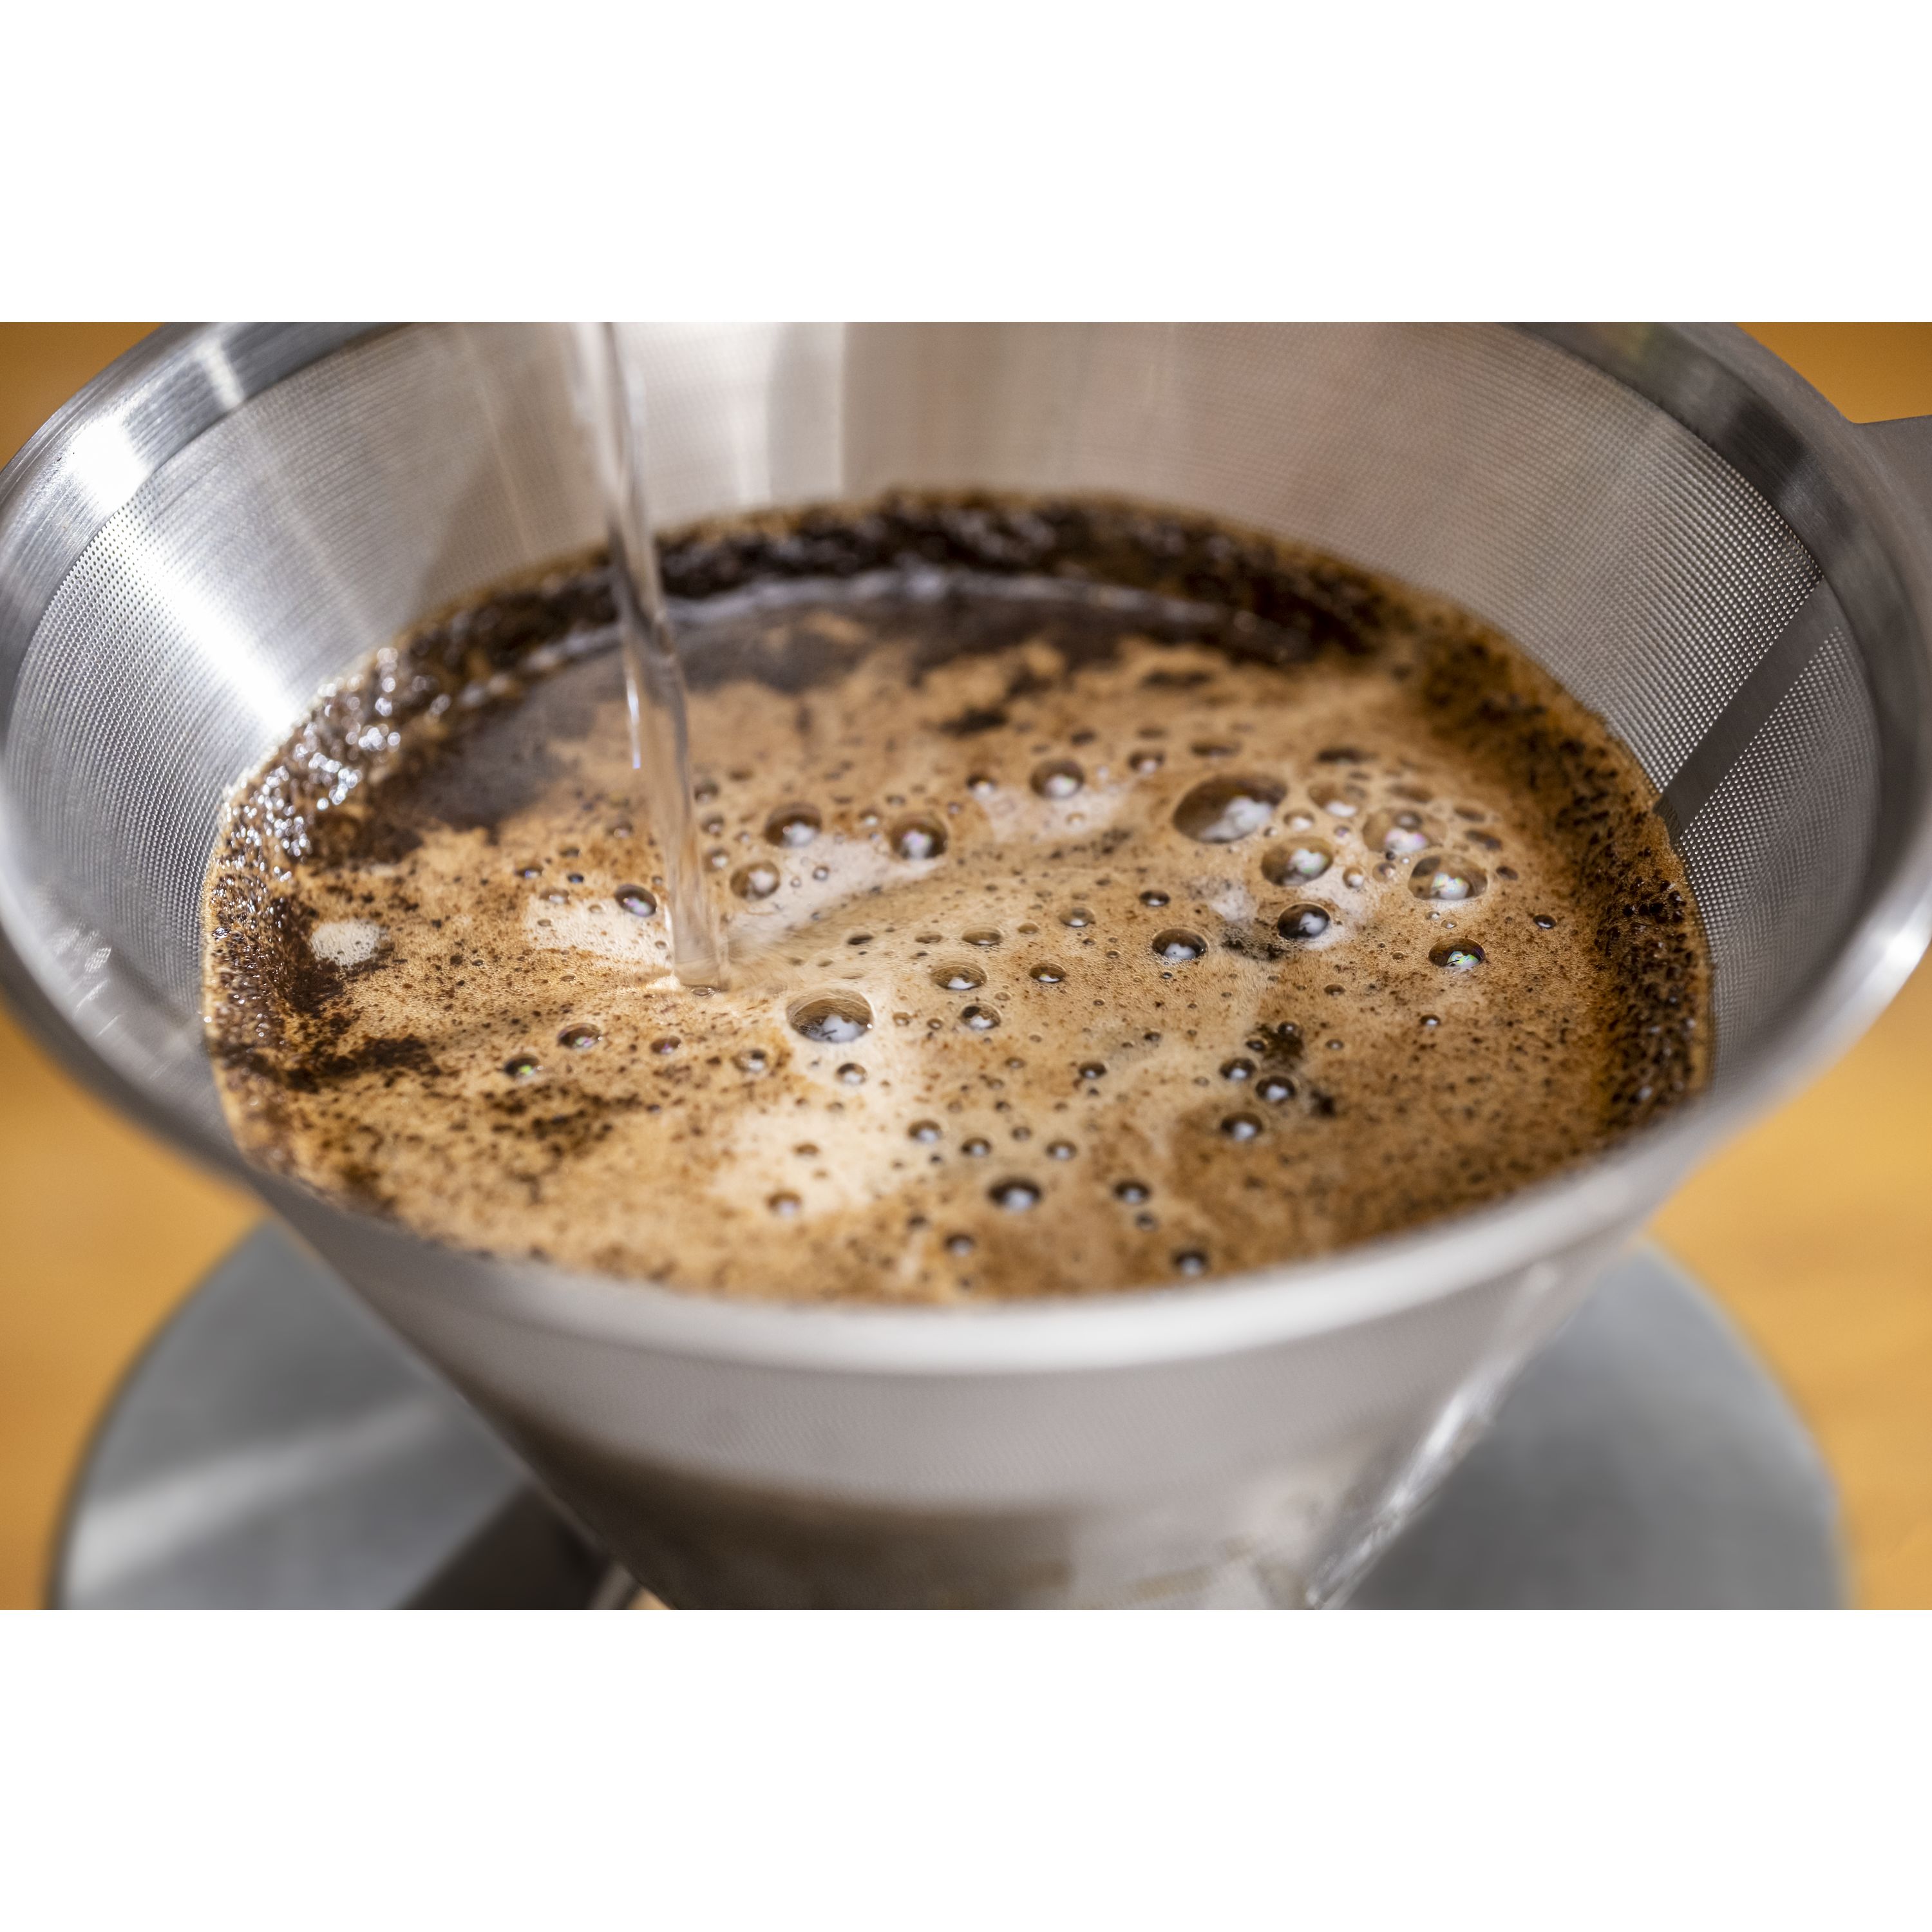 OXO Good Grips Pour Over Coffee Dripper is a Cut above the Rest